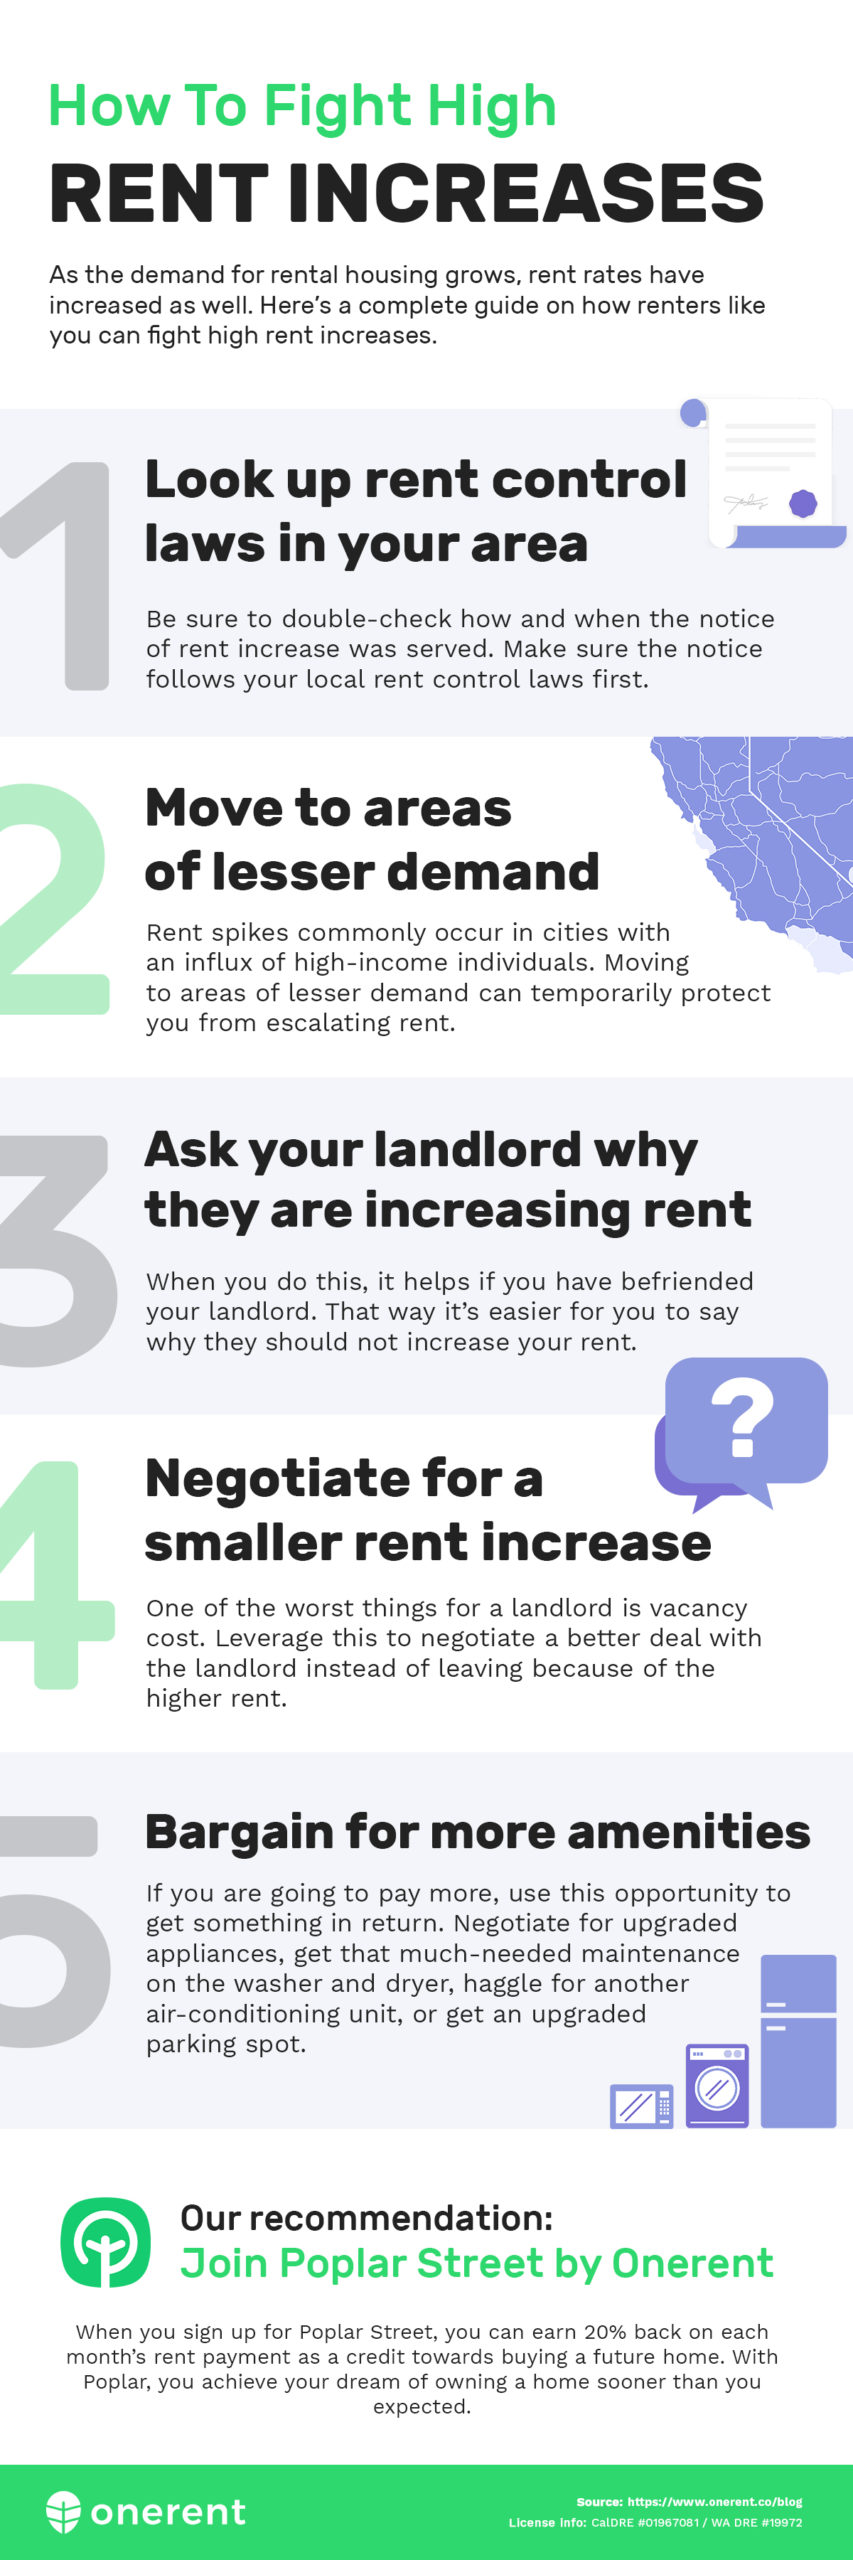 How Renters Can Fight High Rent Increases